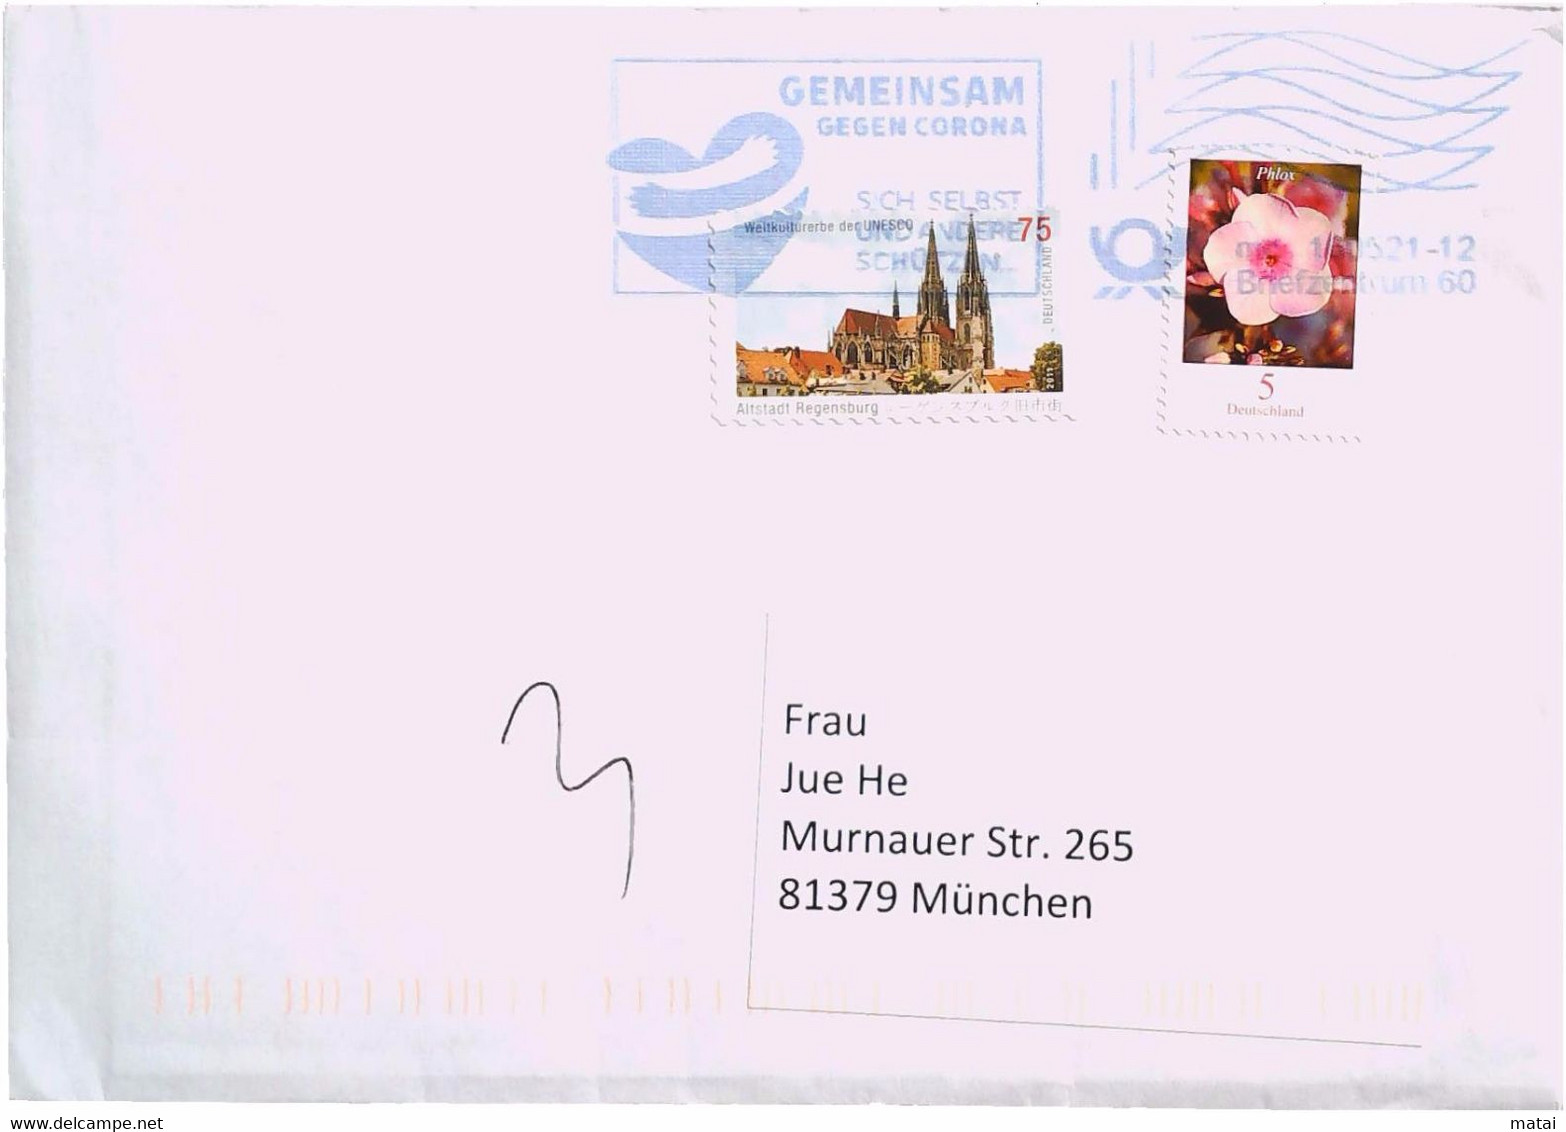 GERMANY COVER WITH  ANTI COVID-19 INFORMATION POSTMARK - Lettres & Documents